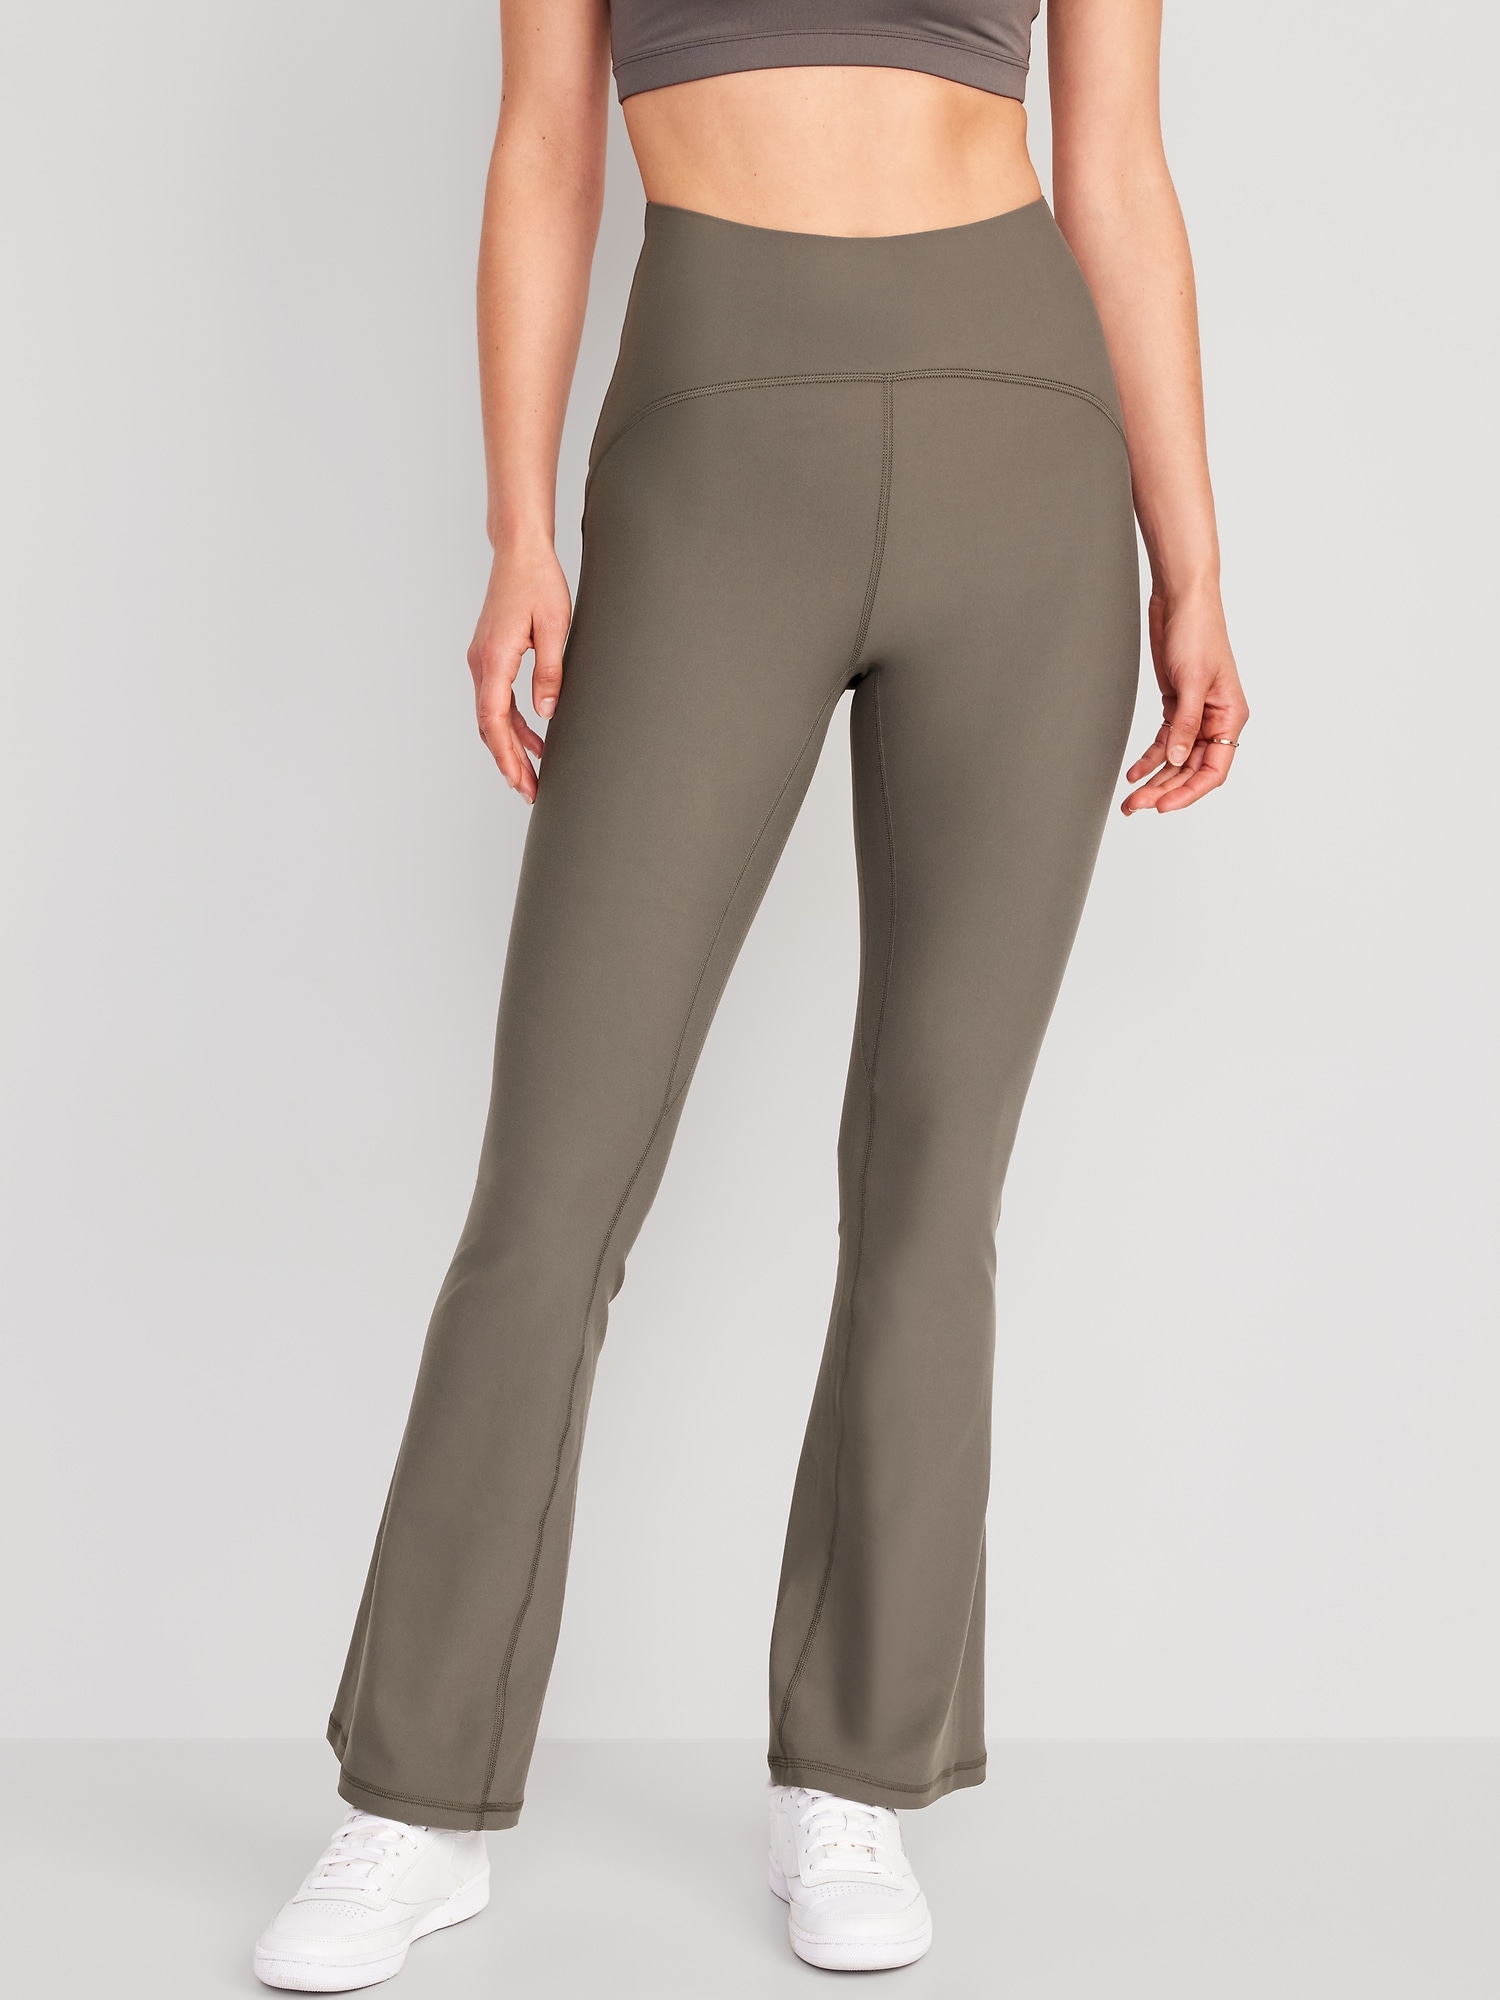 Old Navy High Waisted Cropped Flare Leggings for Women